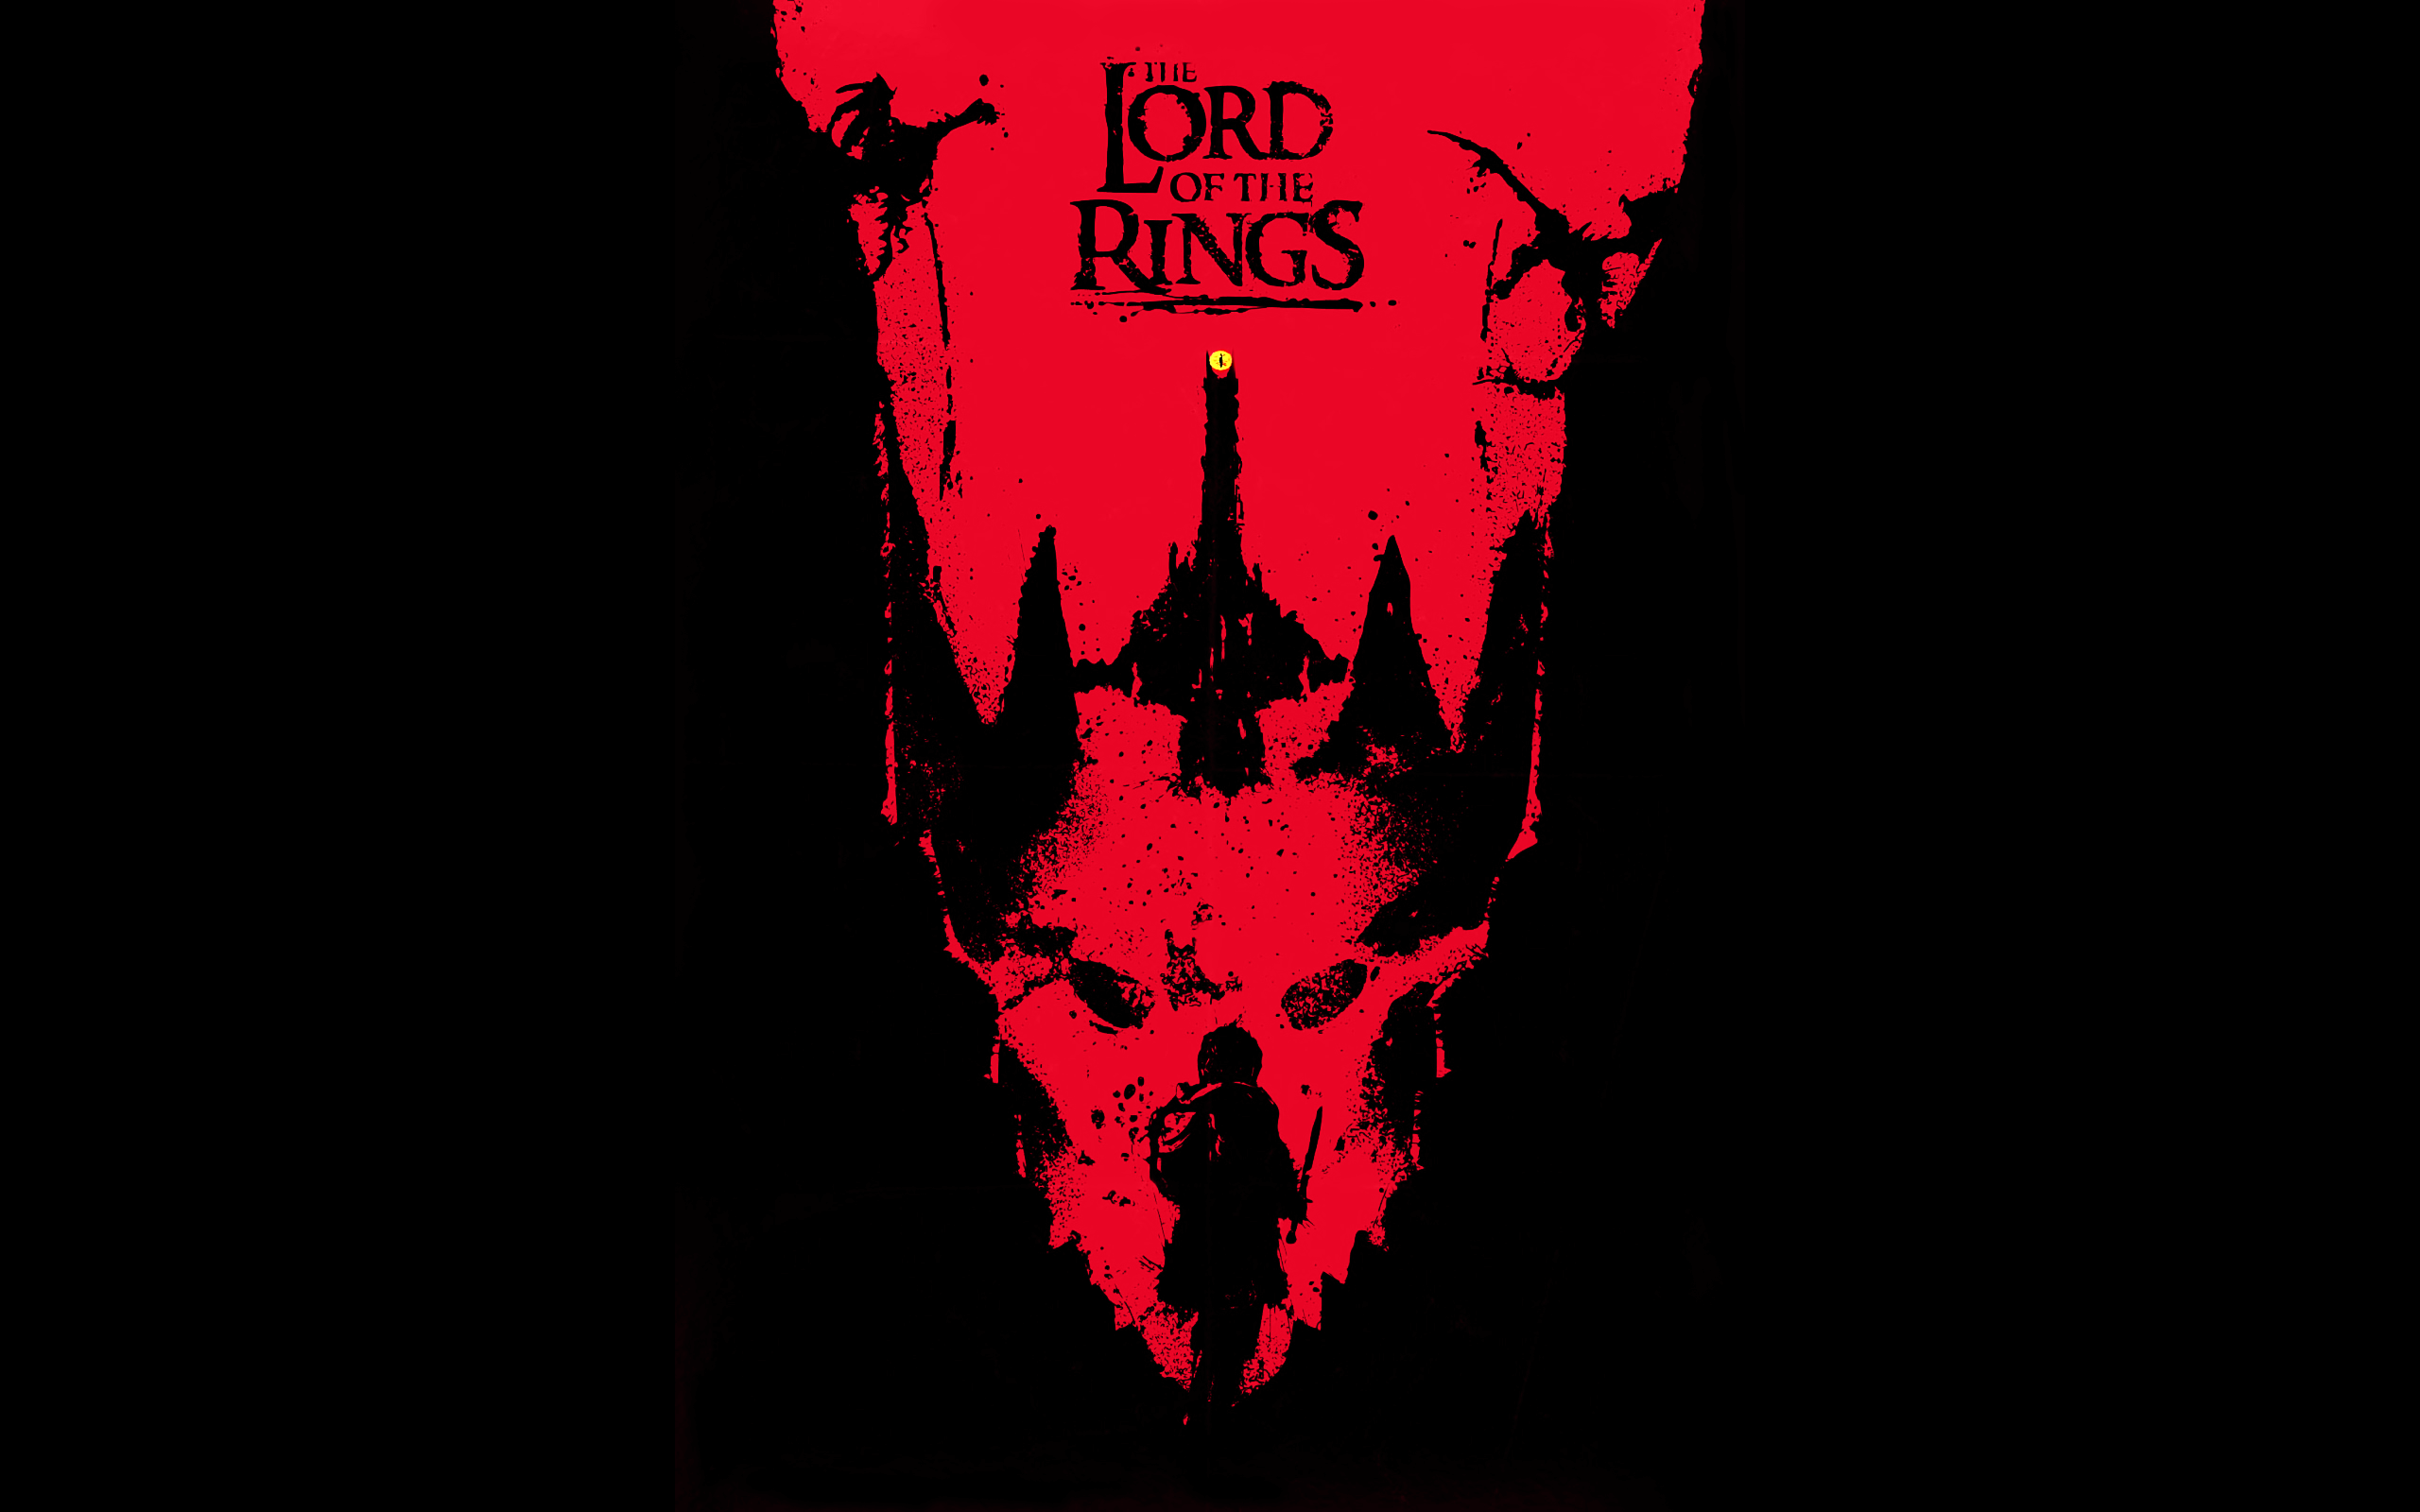 Made A High Res Wallpaper Out Of The Pretty Lotr Poster